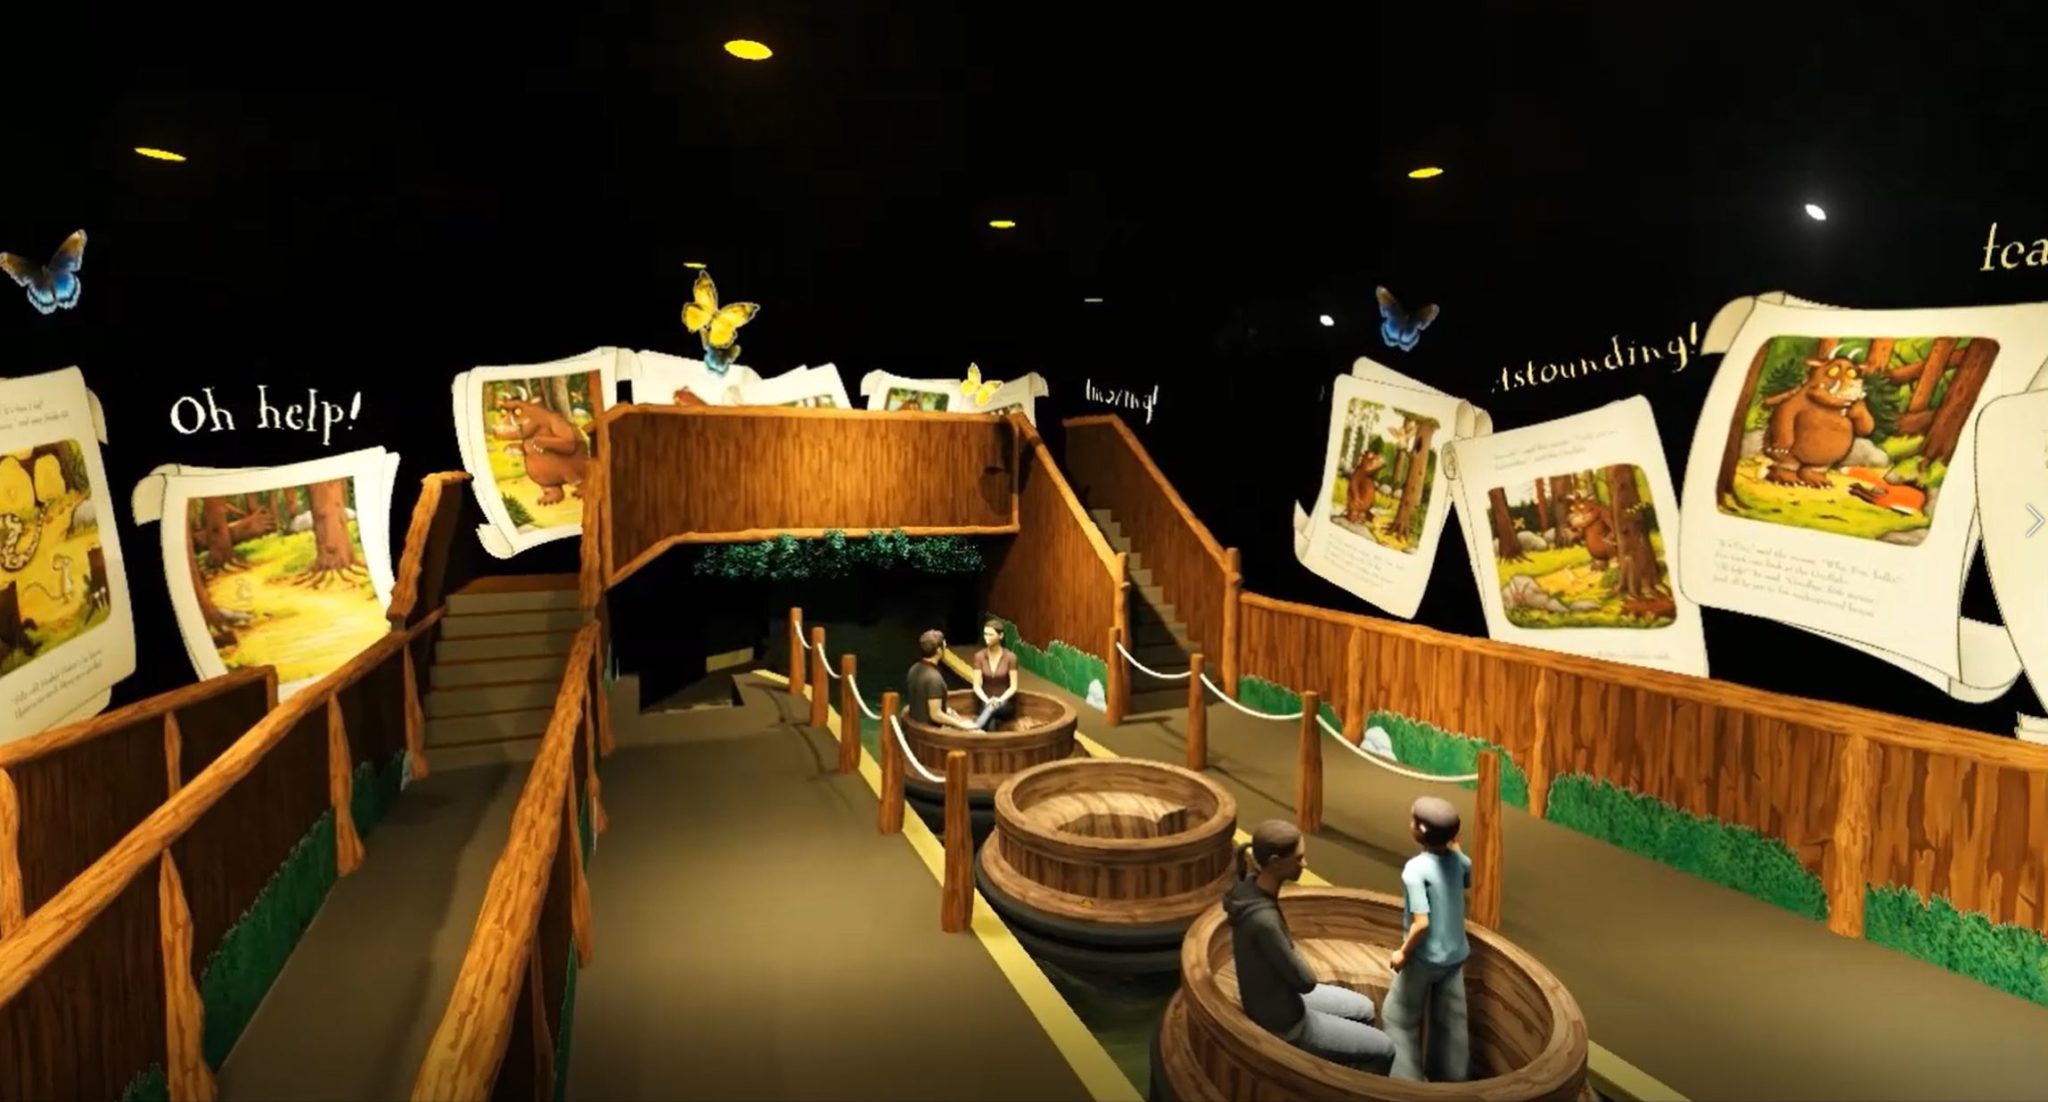 A concept image of a Gruffalo ride station with 3 boats in the station